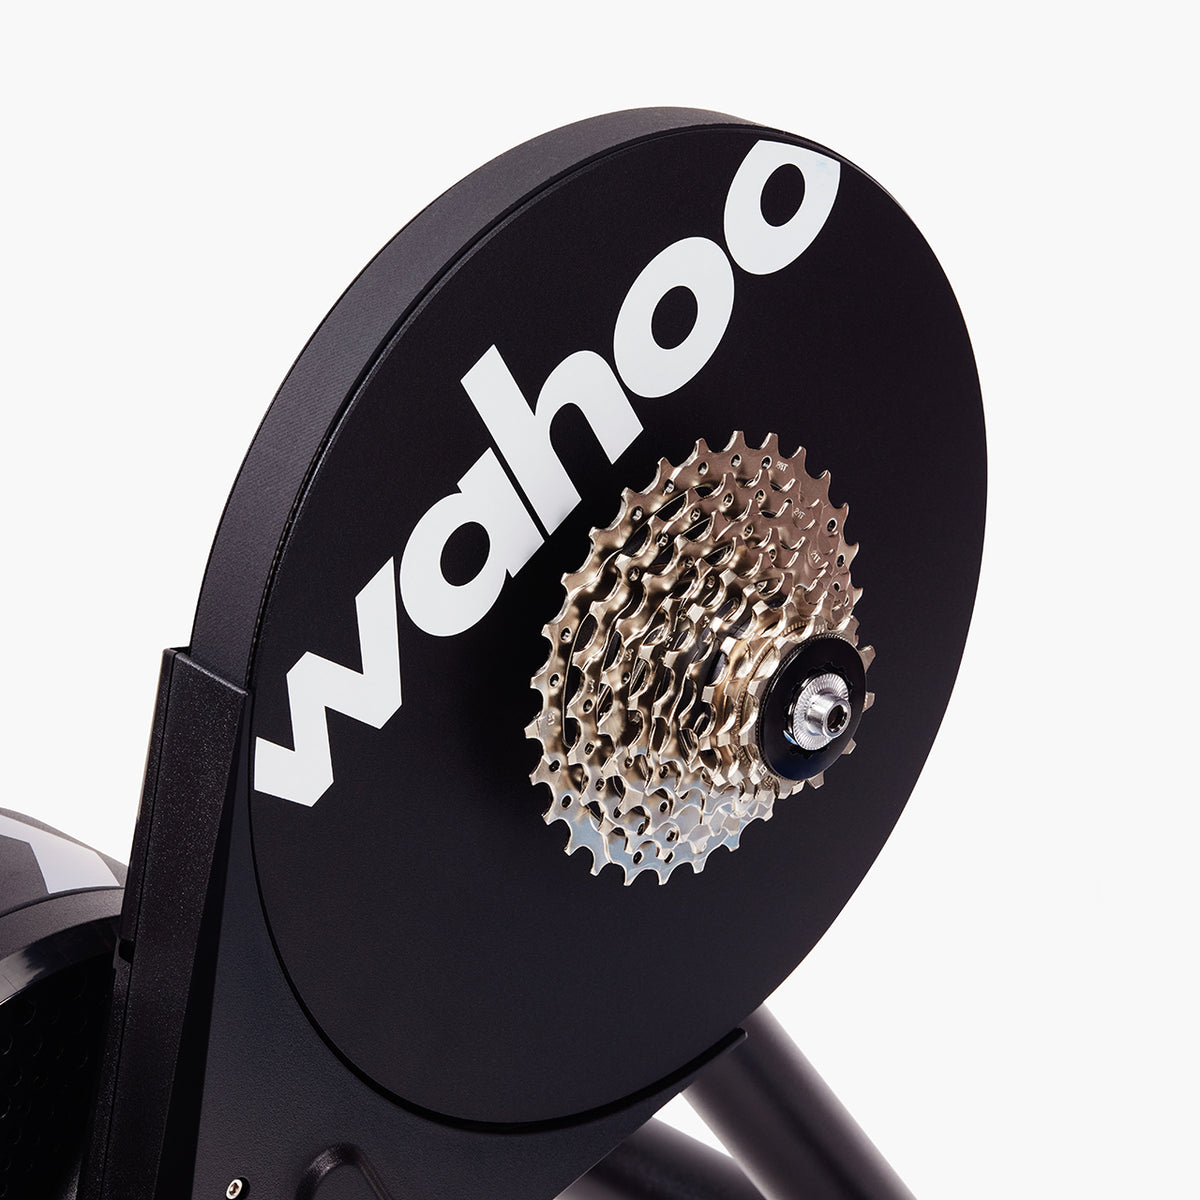 Wahoo KICKR CORE with 9-speed cassette